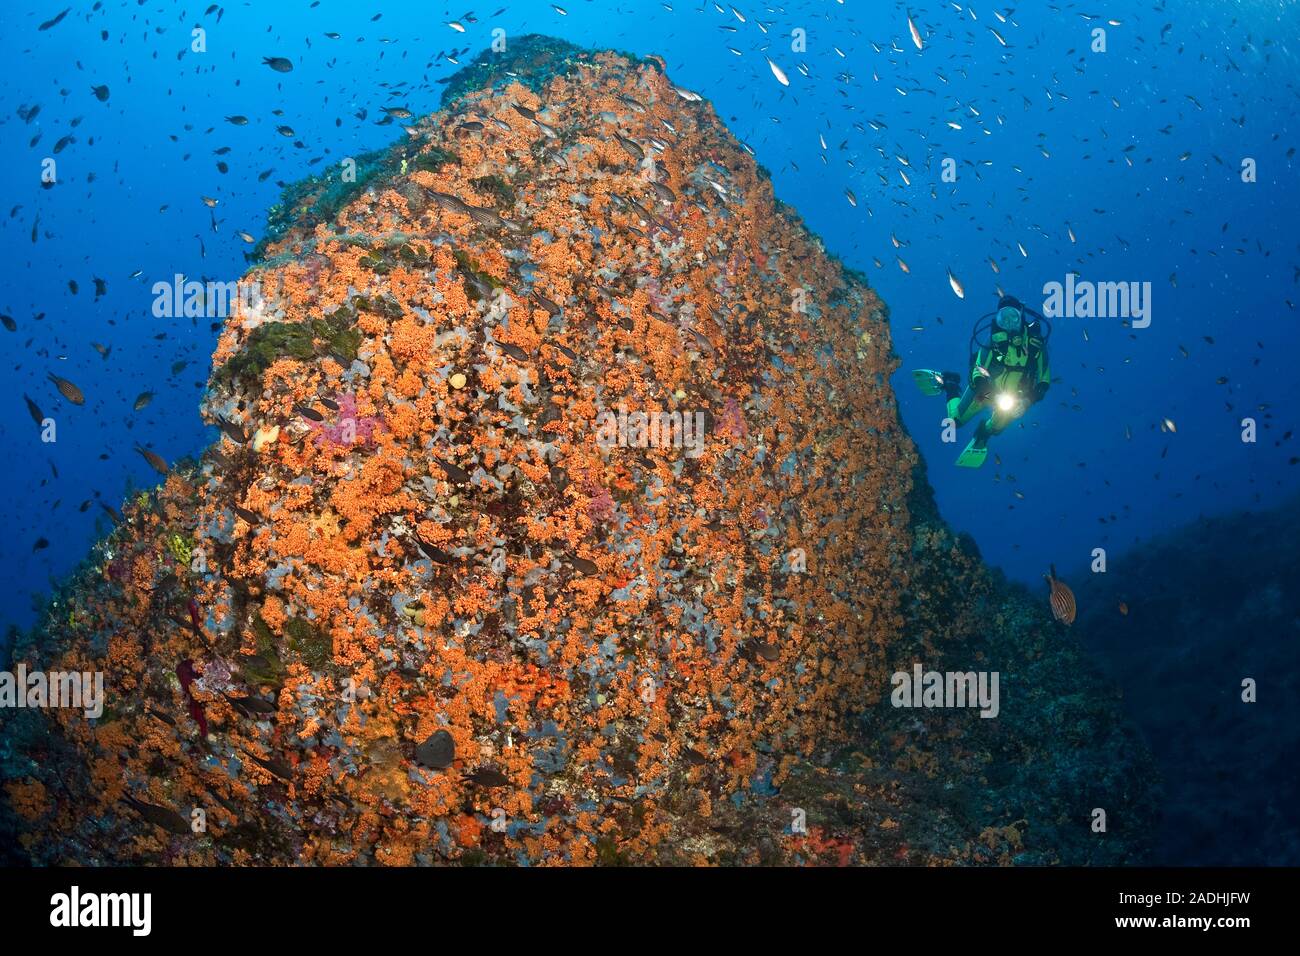 Scuba diver at a big rock covered with yellow cluster anemones (Parazoanthus axinellae), marine park Cap Llebeig, Dragonera, Sant Elm, Mallorca, Spain Stock Photo